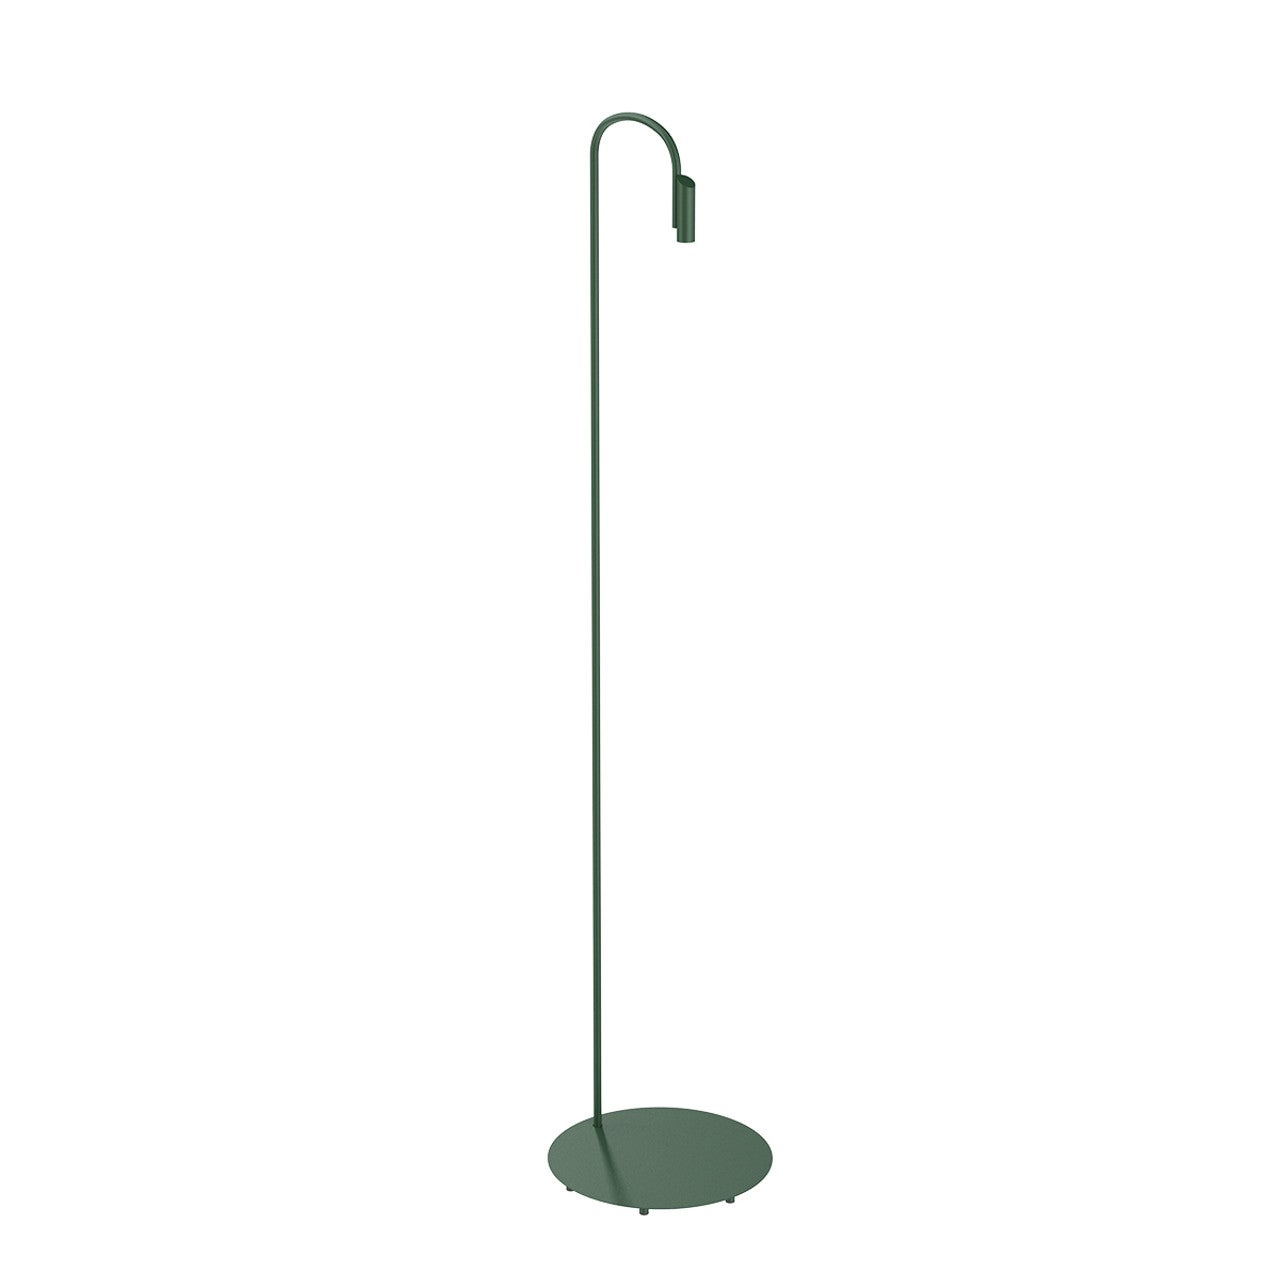 Flos Caule 2700K Model 5 Outdoor Floor Lamp in Forest Green with Regular Shade For Sale